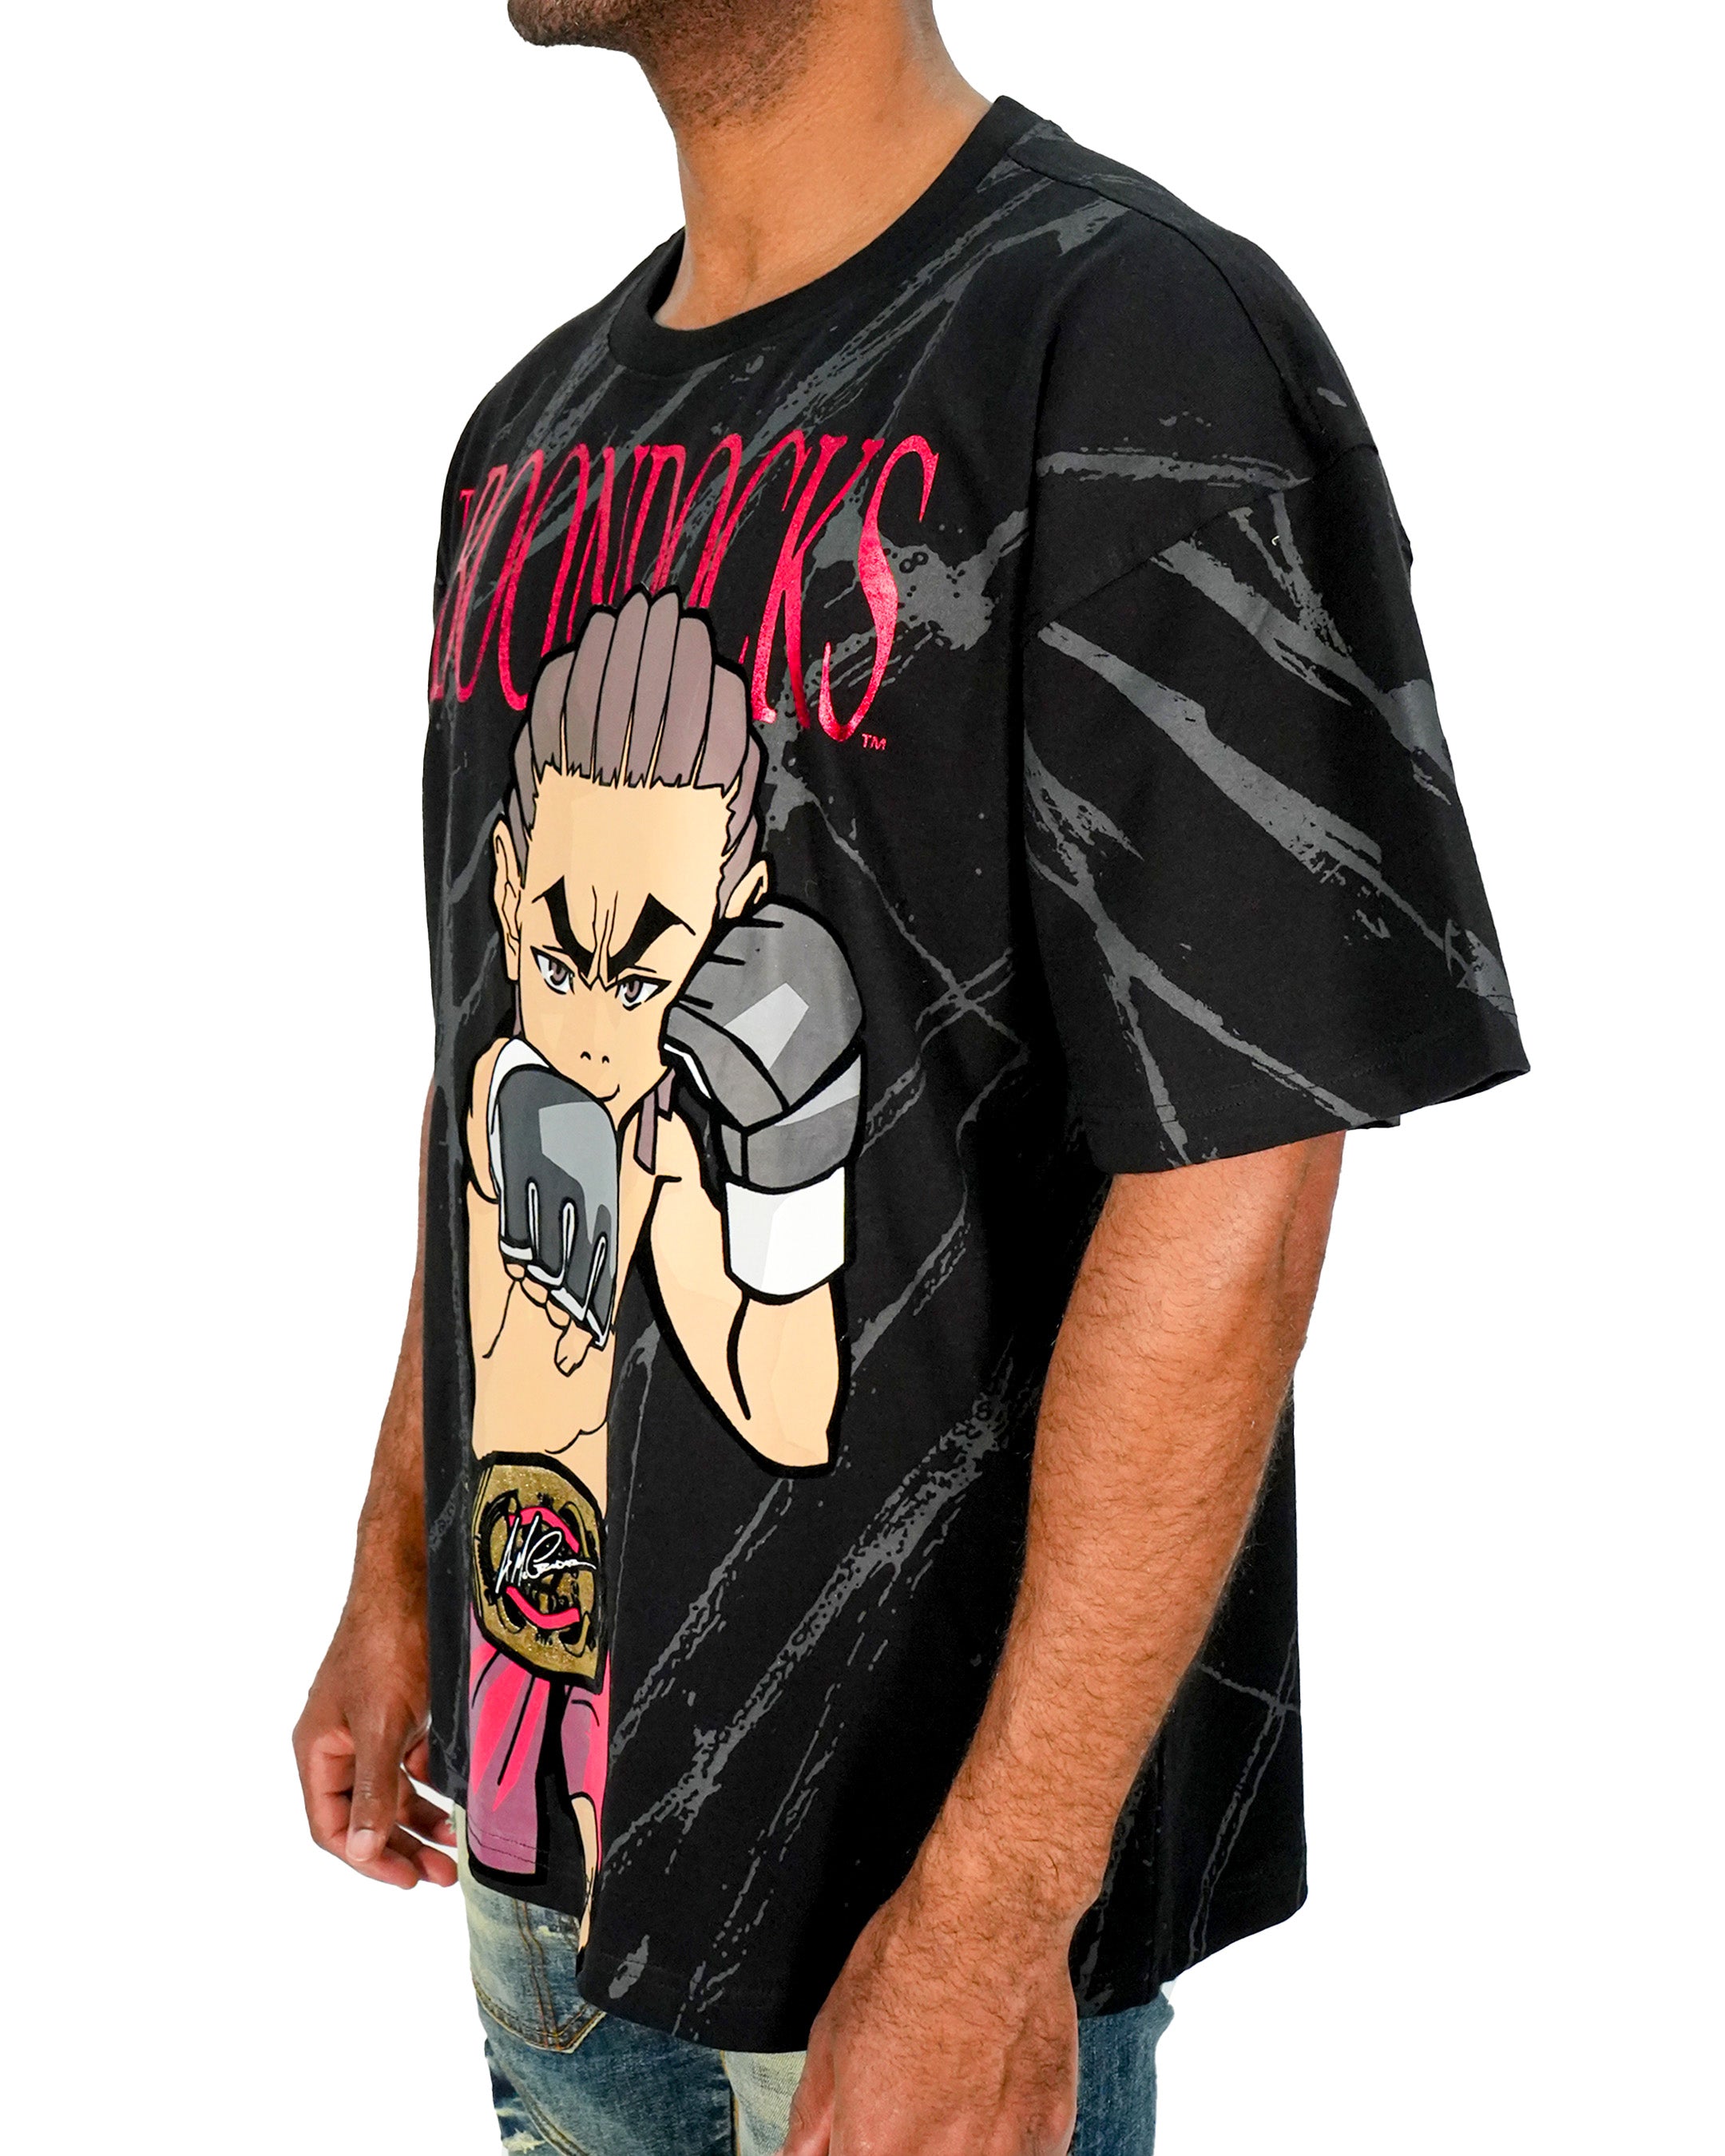 The Boondocks - Riley Fighter Over Sized Black T-Shirt